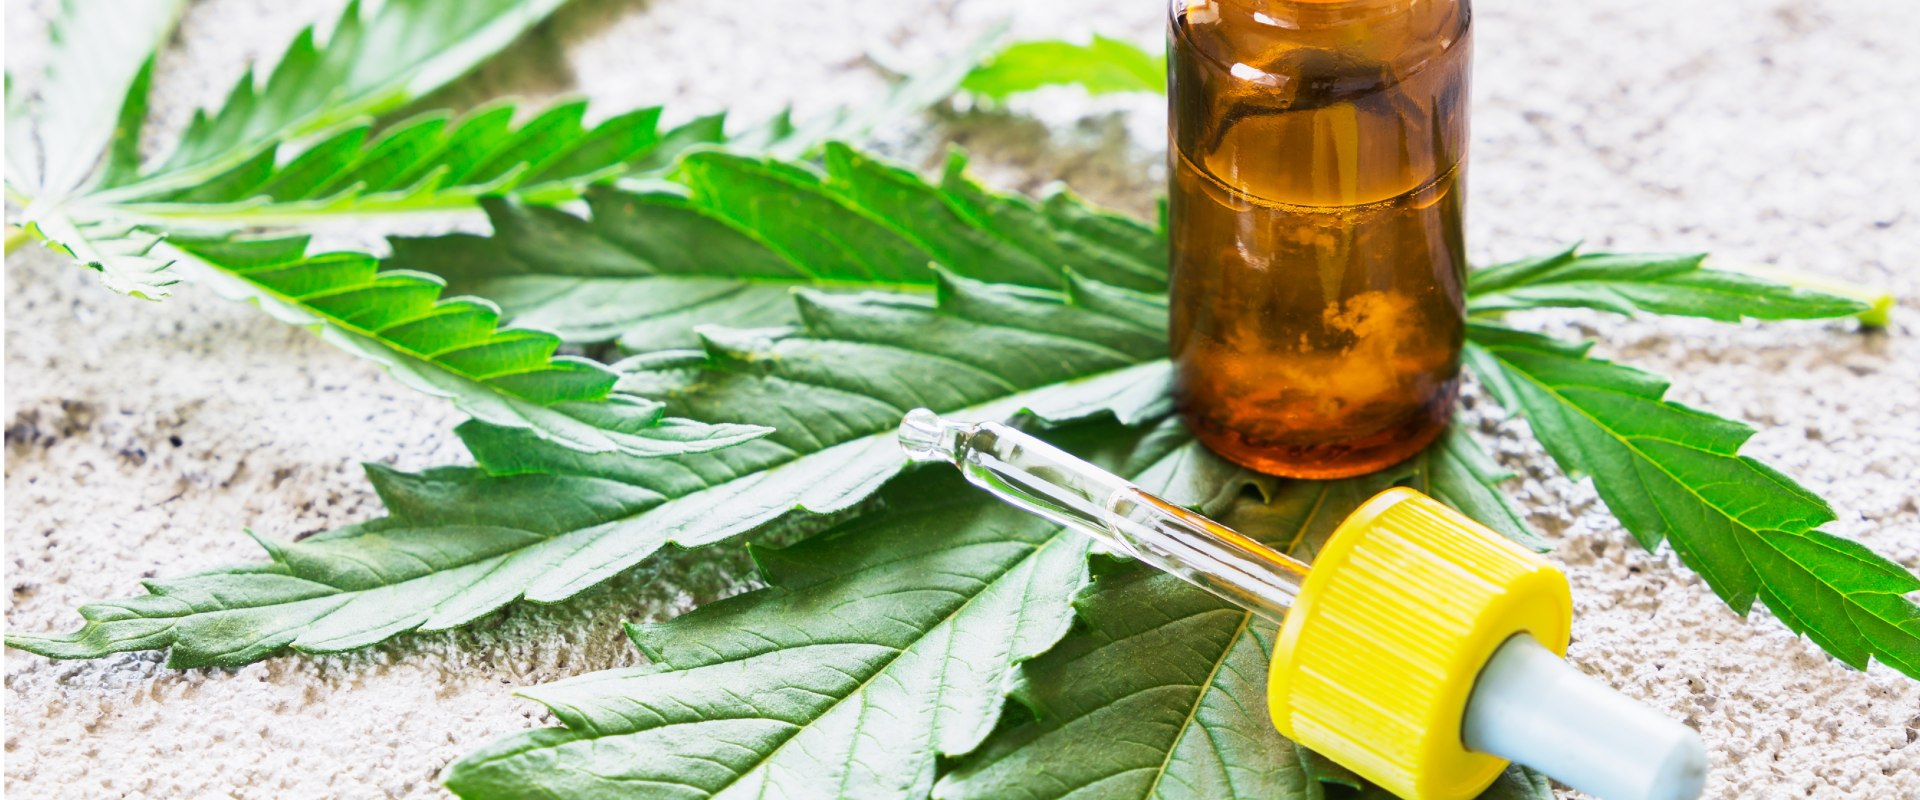 Which is Better for Pain Relief: Hemp or CBD?